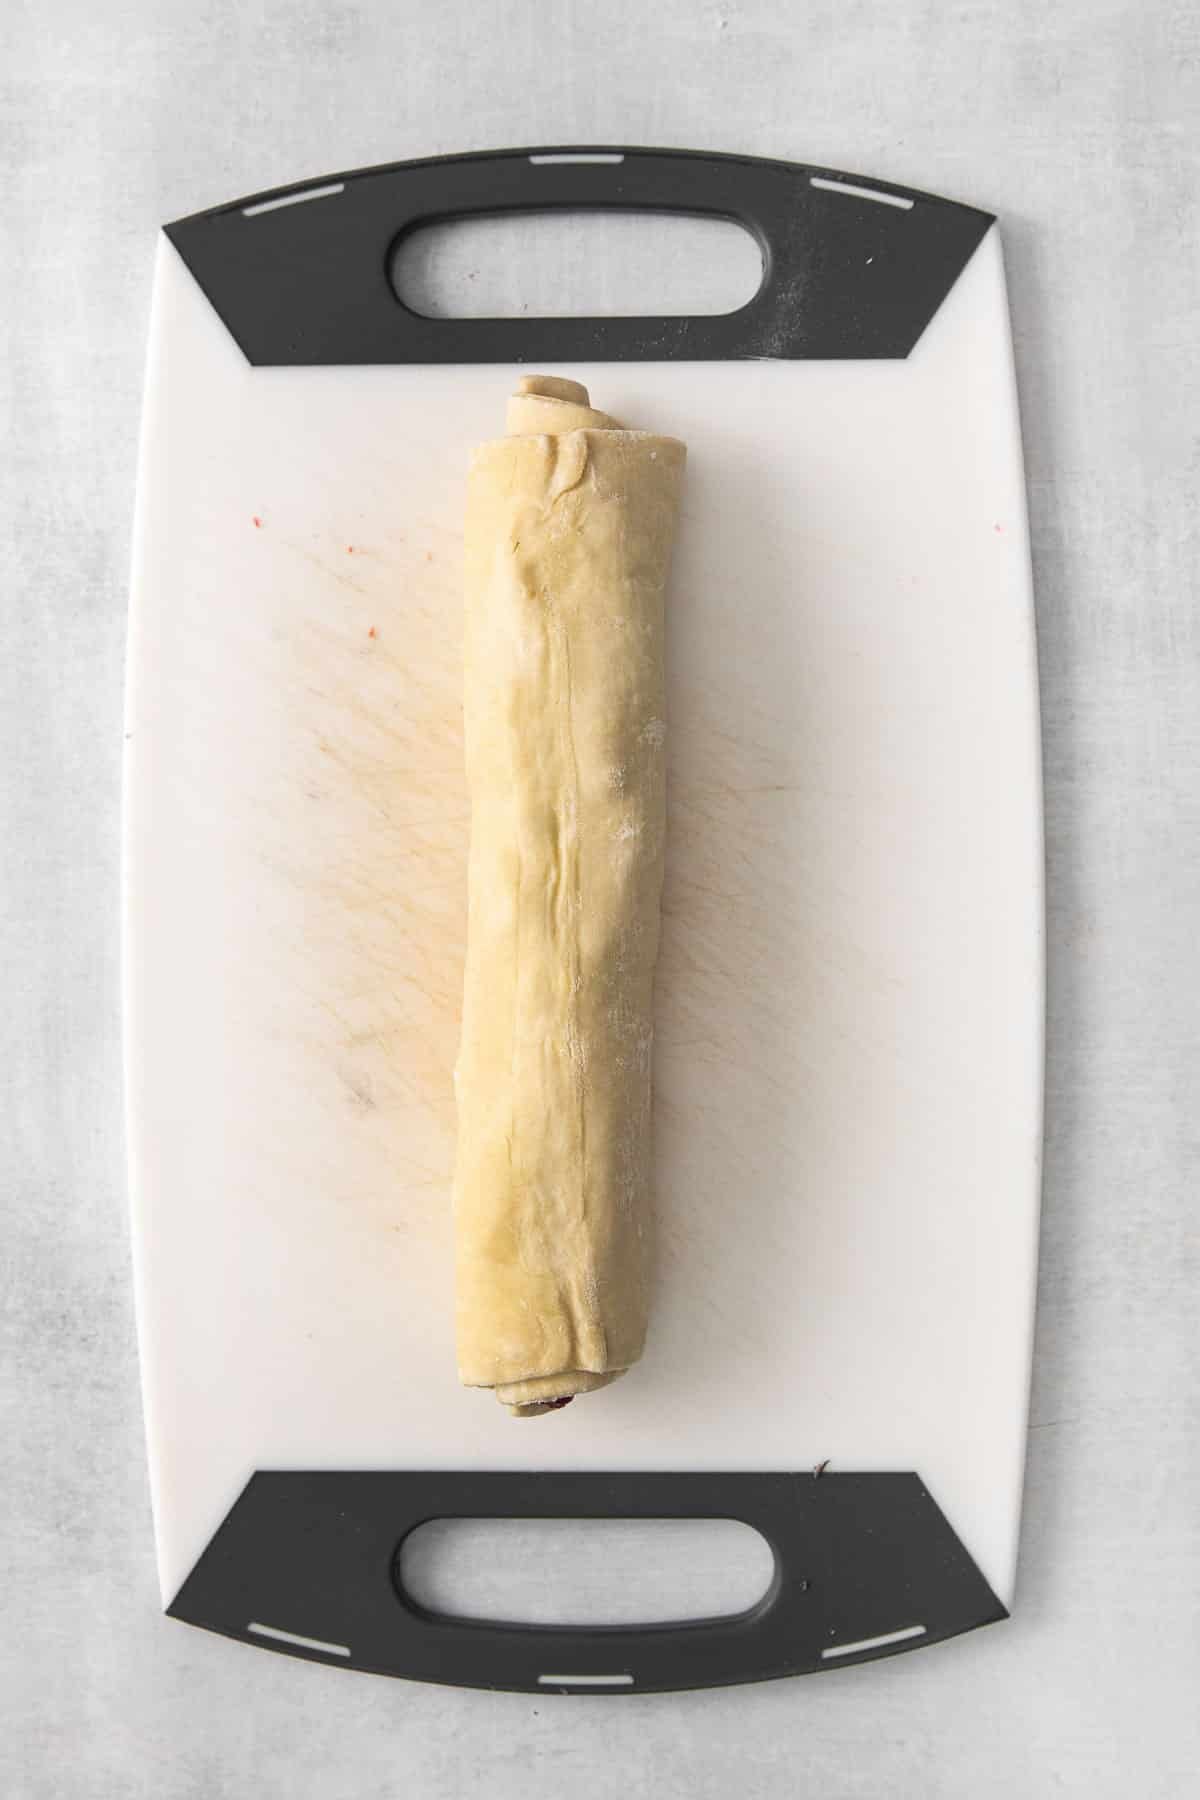 puff pastry dough rolled up on a white cutting board.